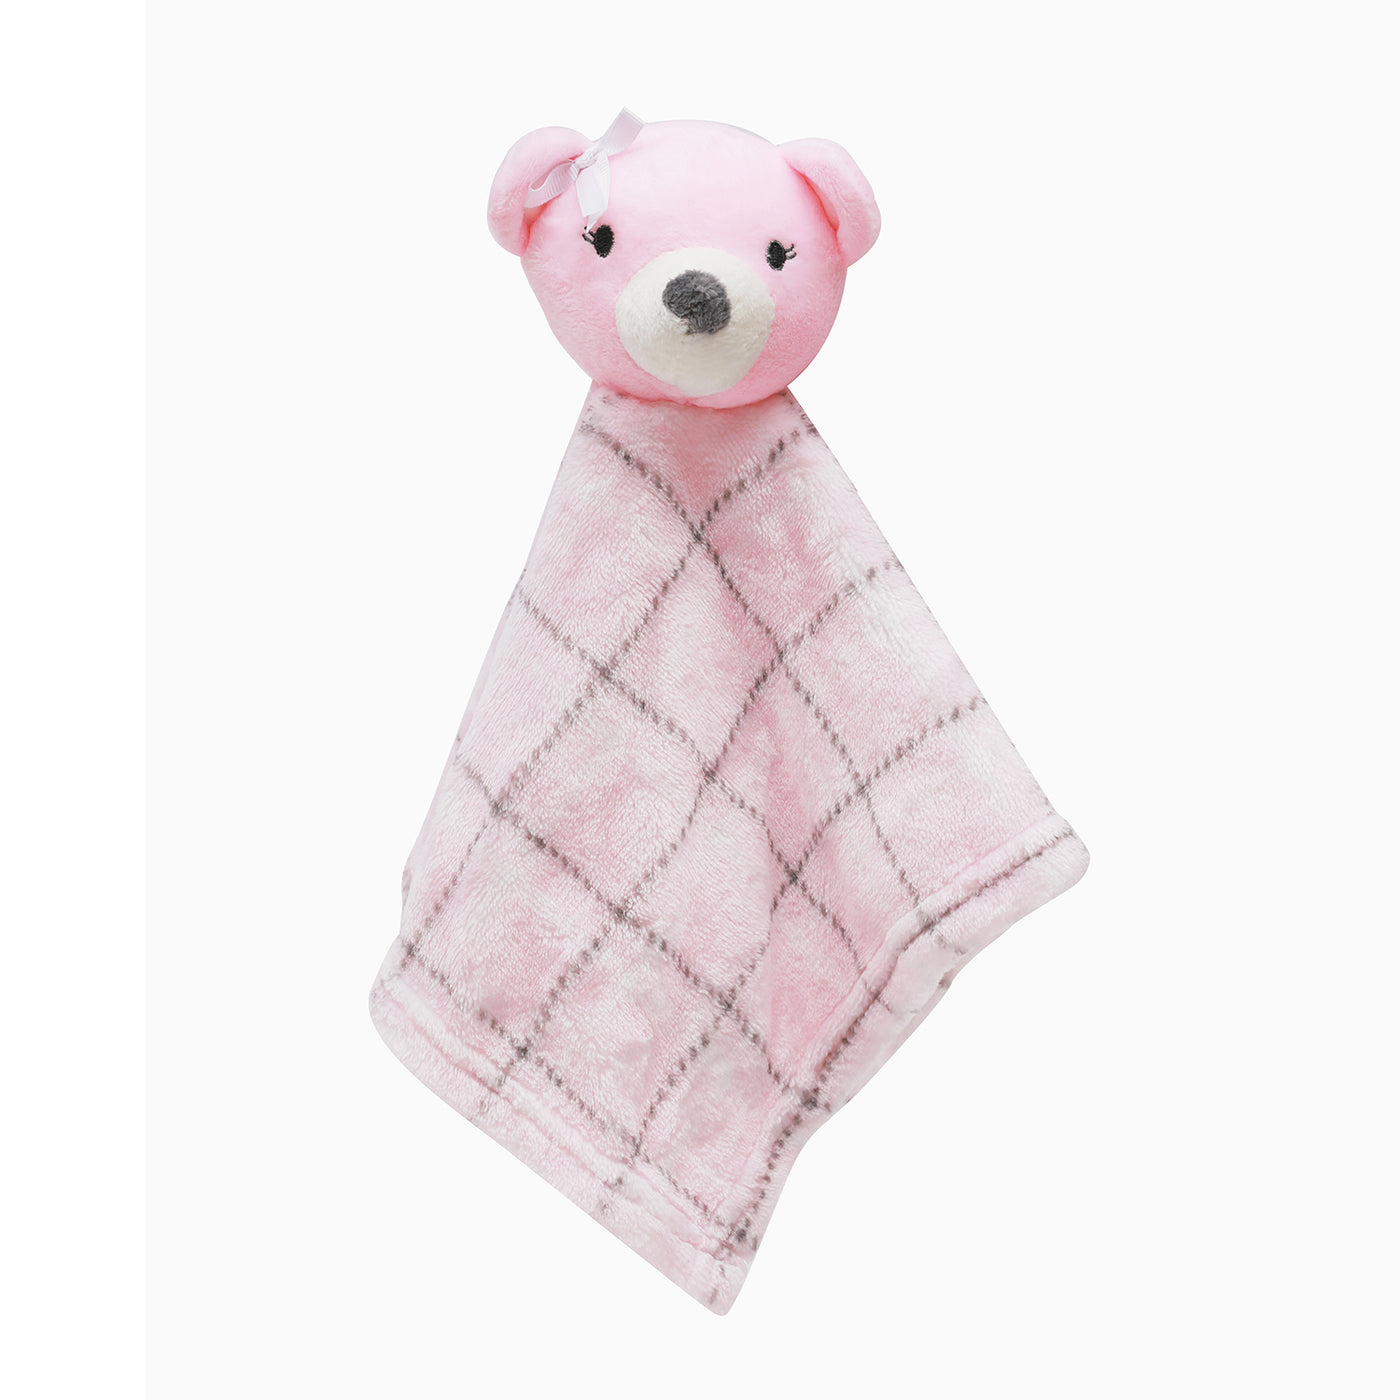 Personalised Customized Luvable Friends Plush Blanket With Pink Bear 17451 - Little Kooma